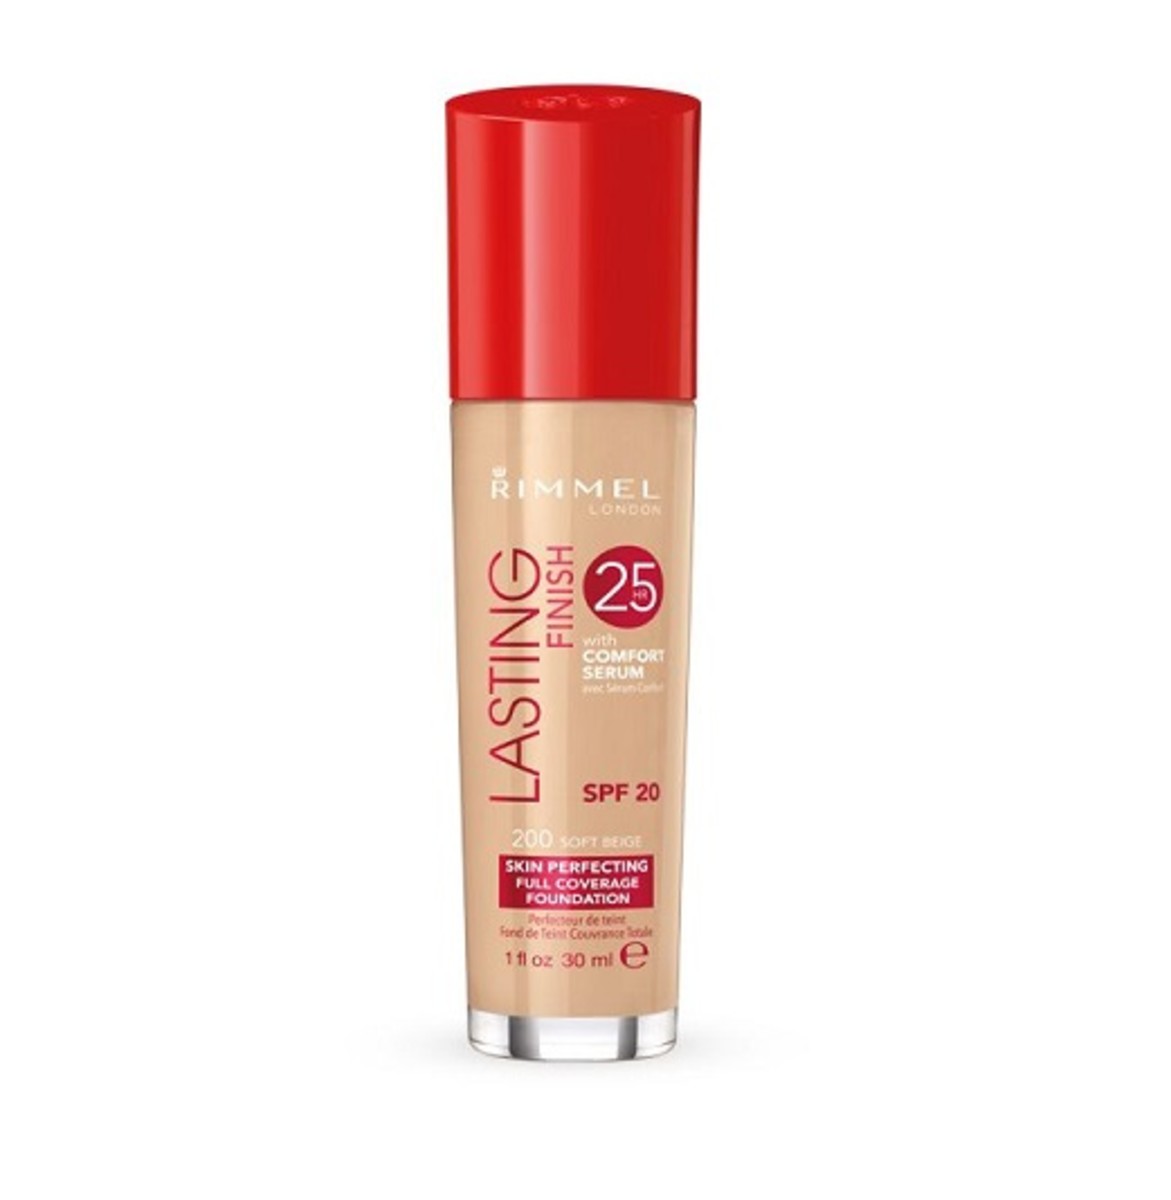 Rimmel lasting Finish 25 hour Foundation is a great everyday foundation, though it does take some time to dry after application.